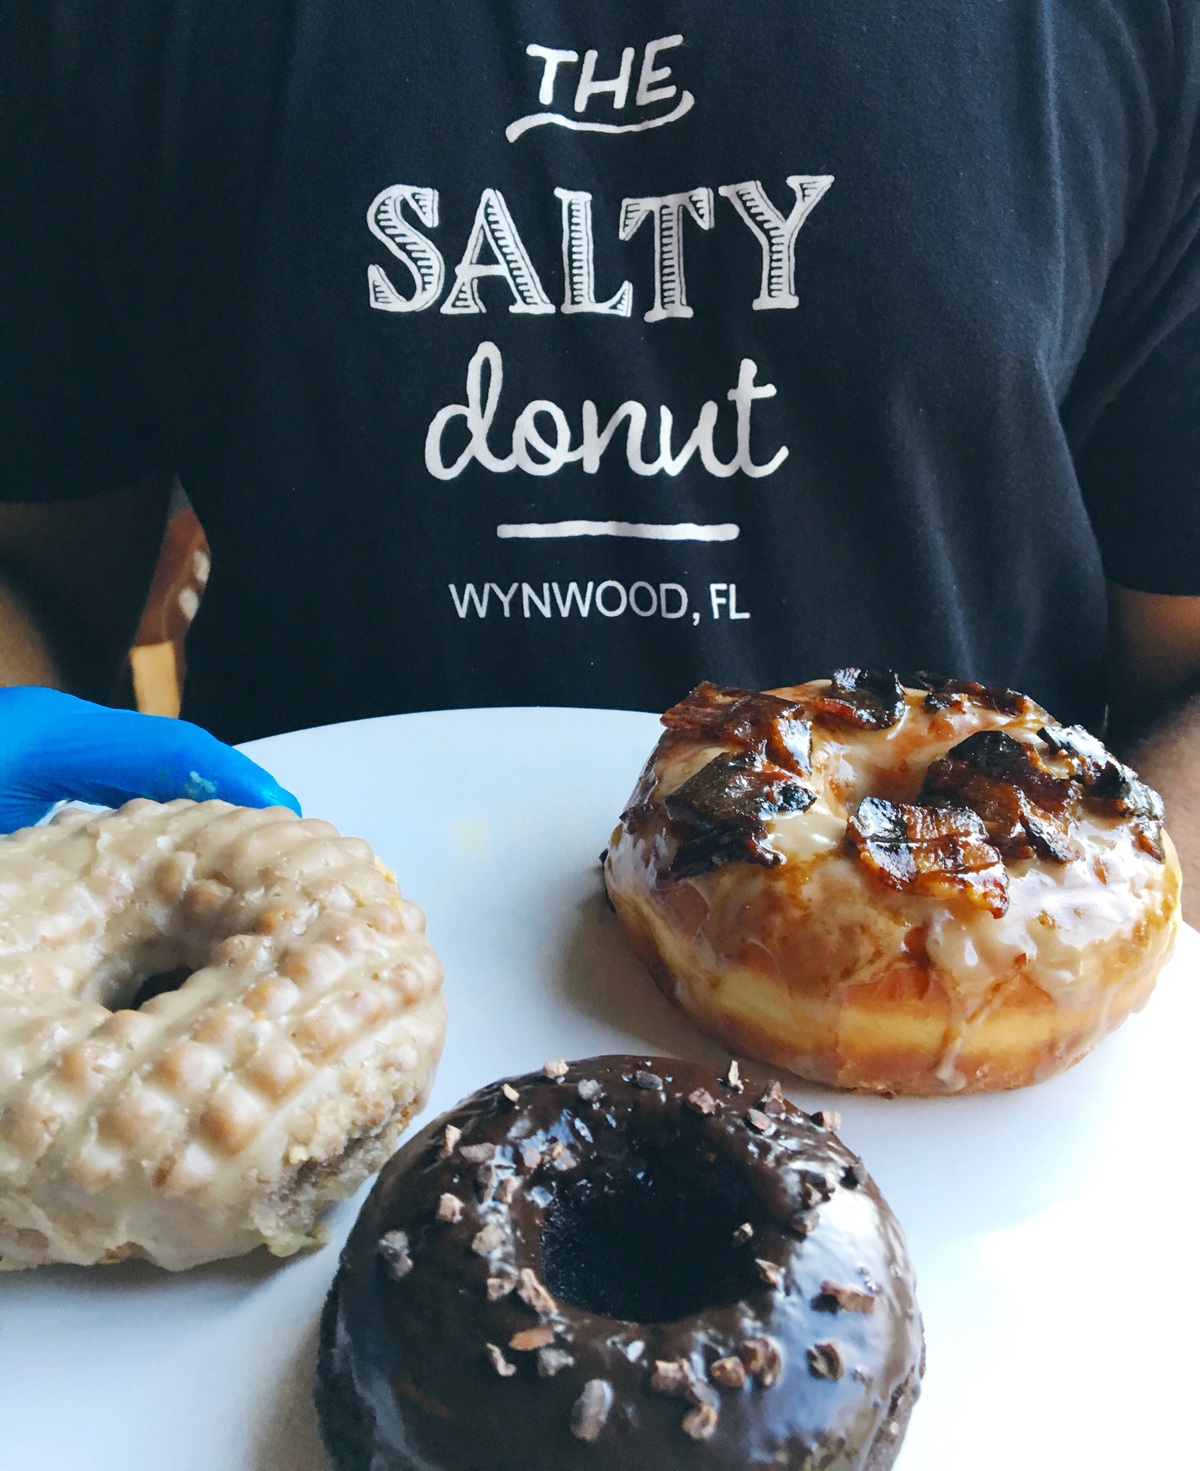 Get some FREE Salty donuts at The Capital One Cafe opening in Brickell